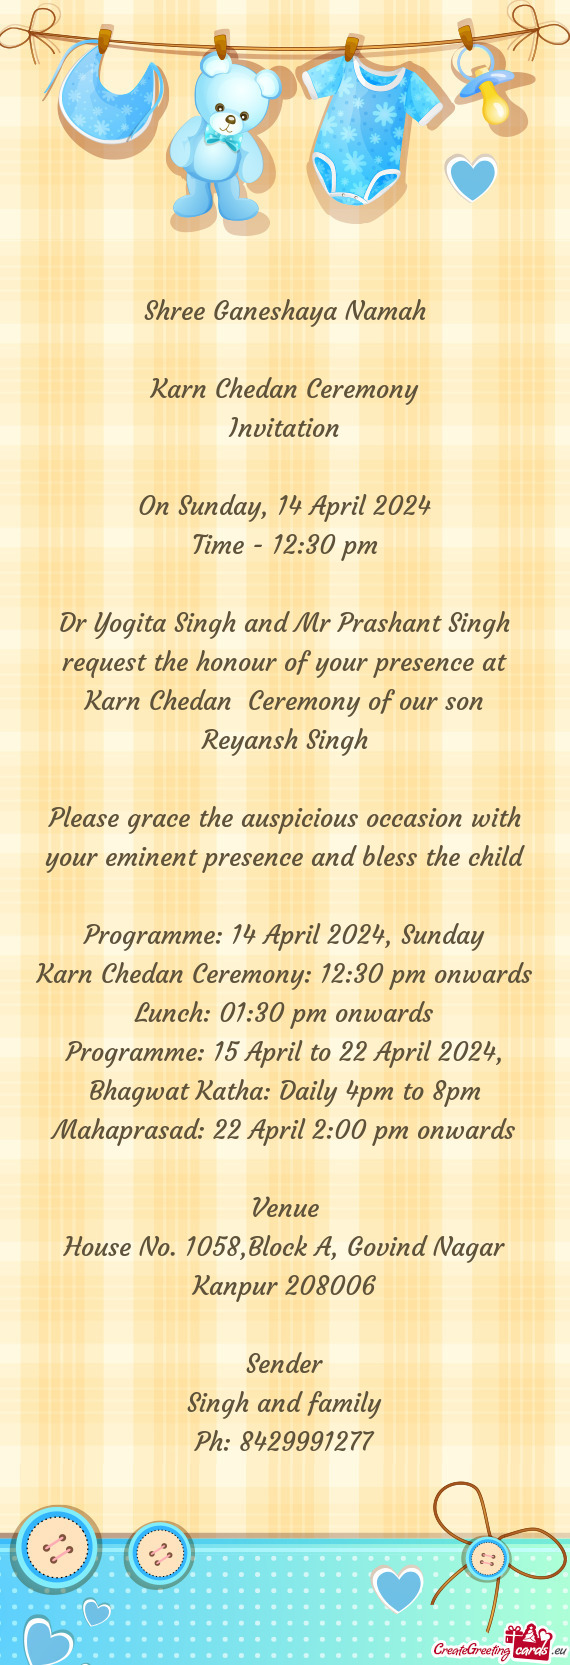 Dr Yogita Singh and Mr Prashant Singh request the honour of your presence at Karn Chedan Ceremony o